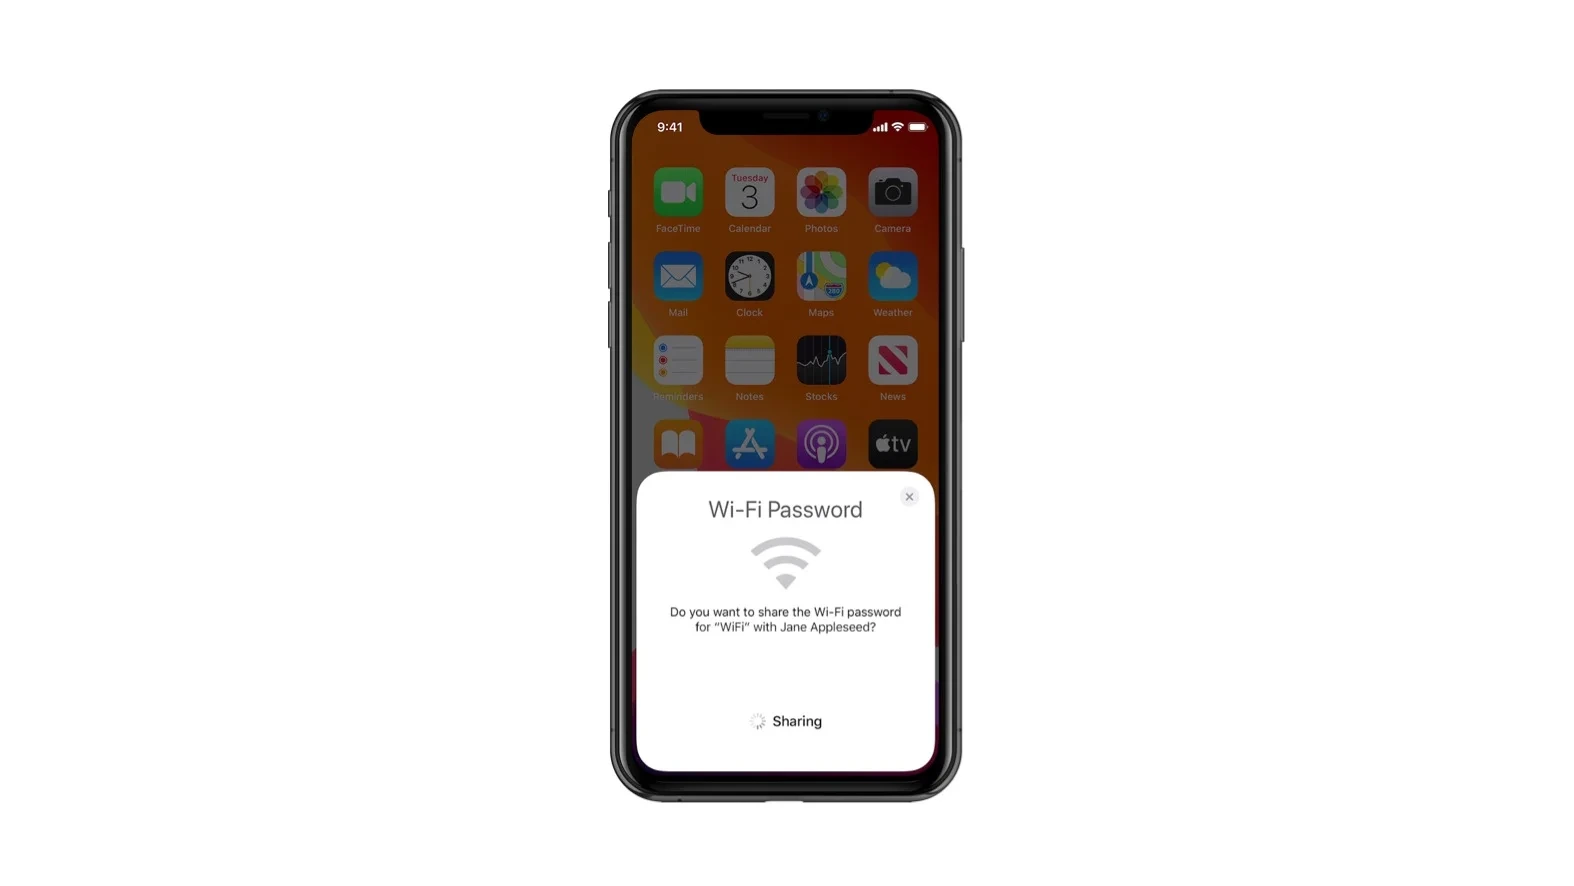  phone will share access to the Wi-Fi network